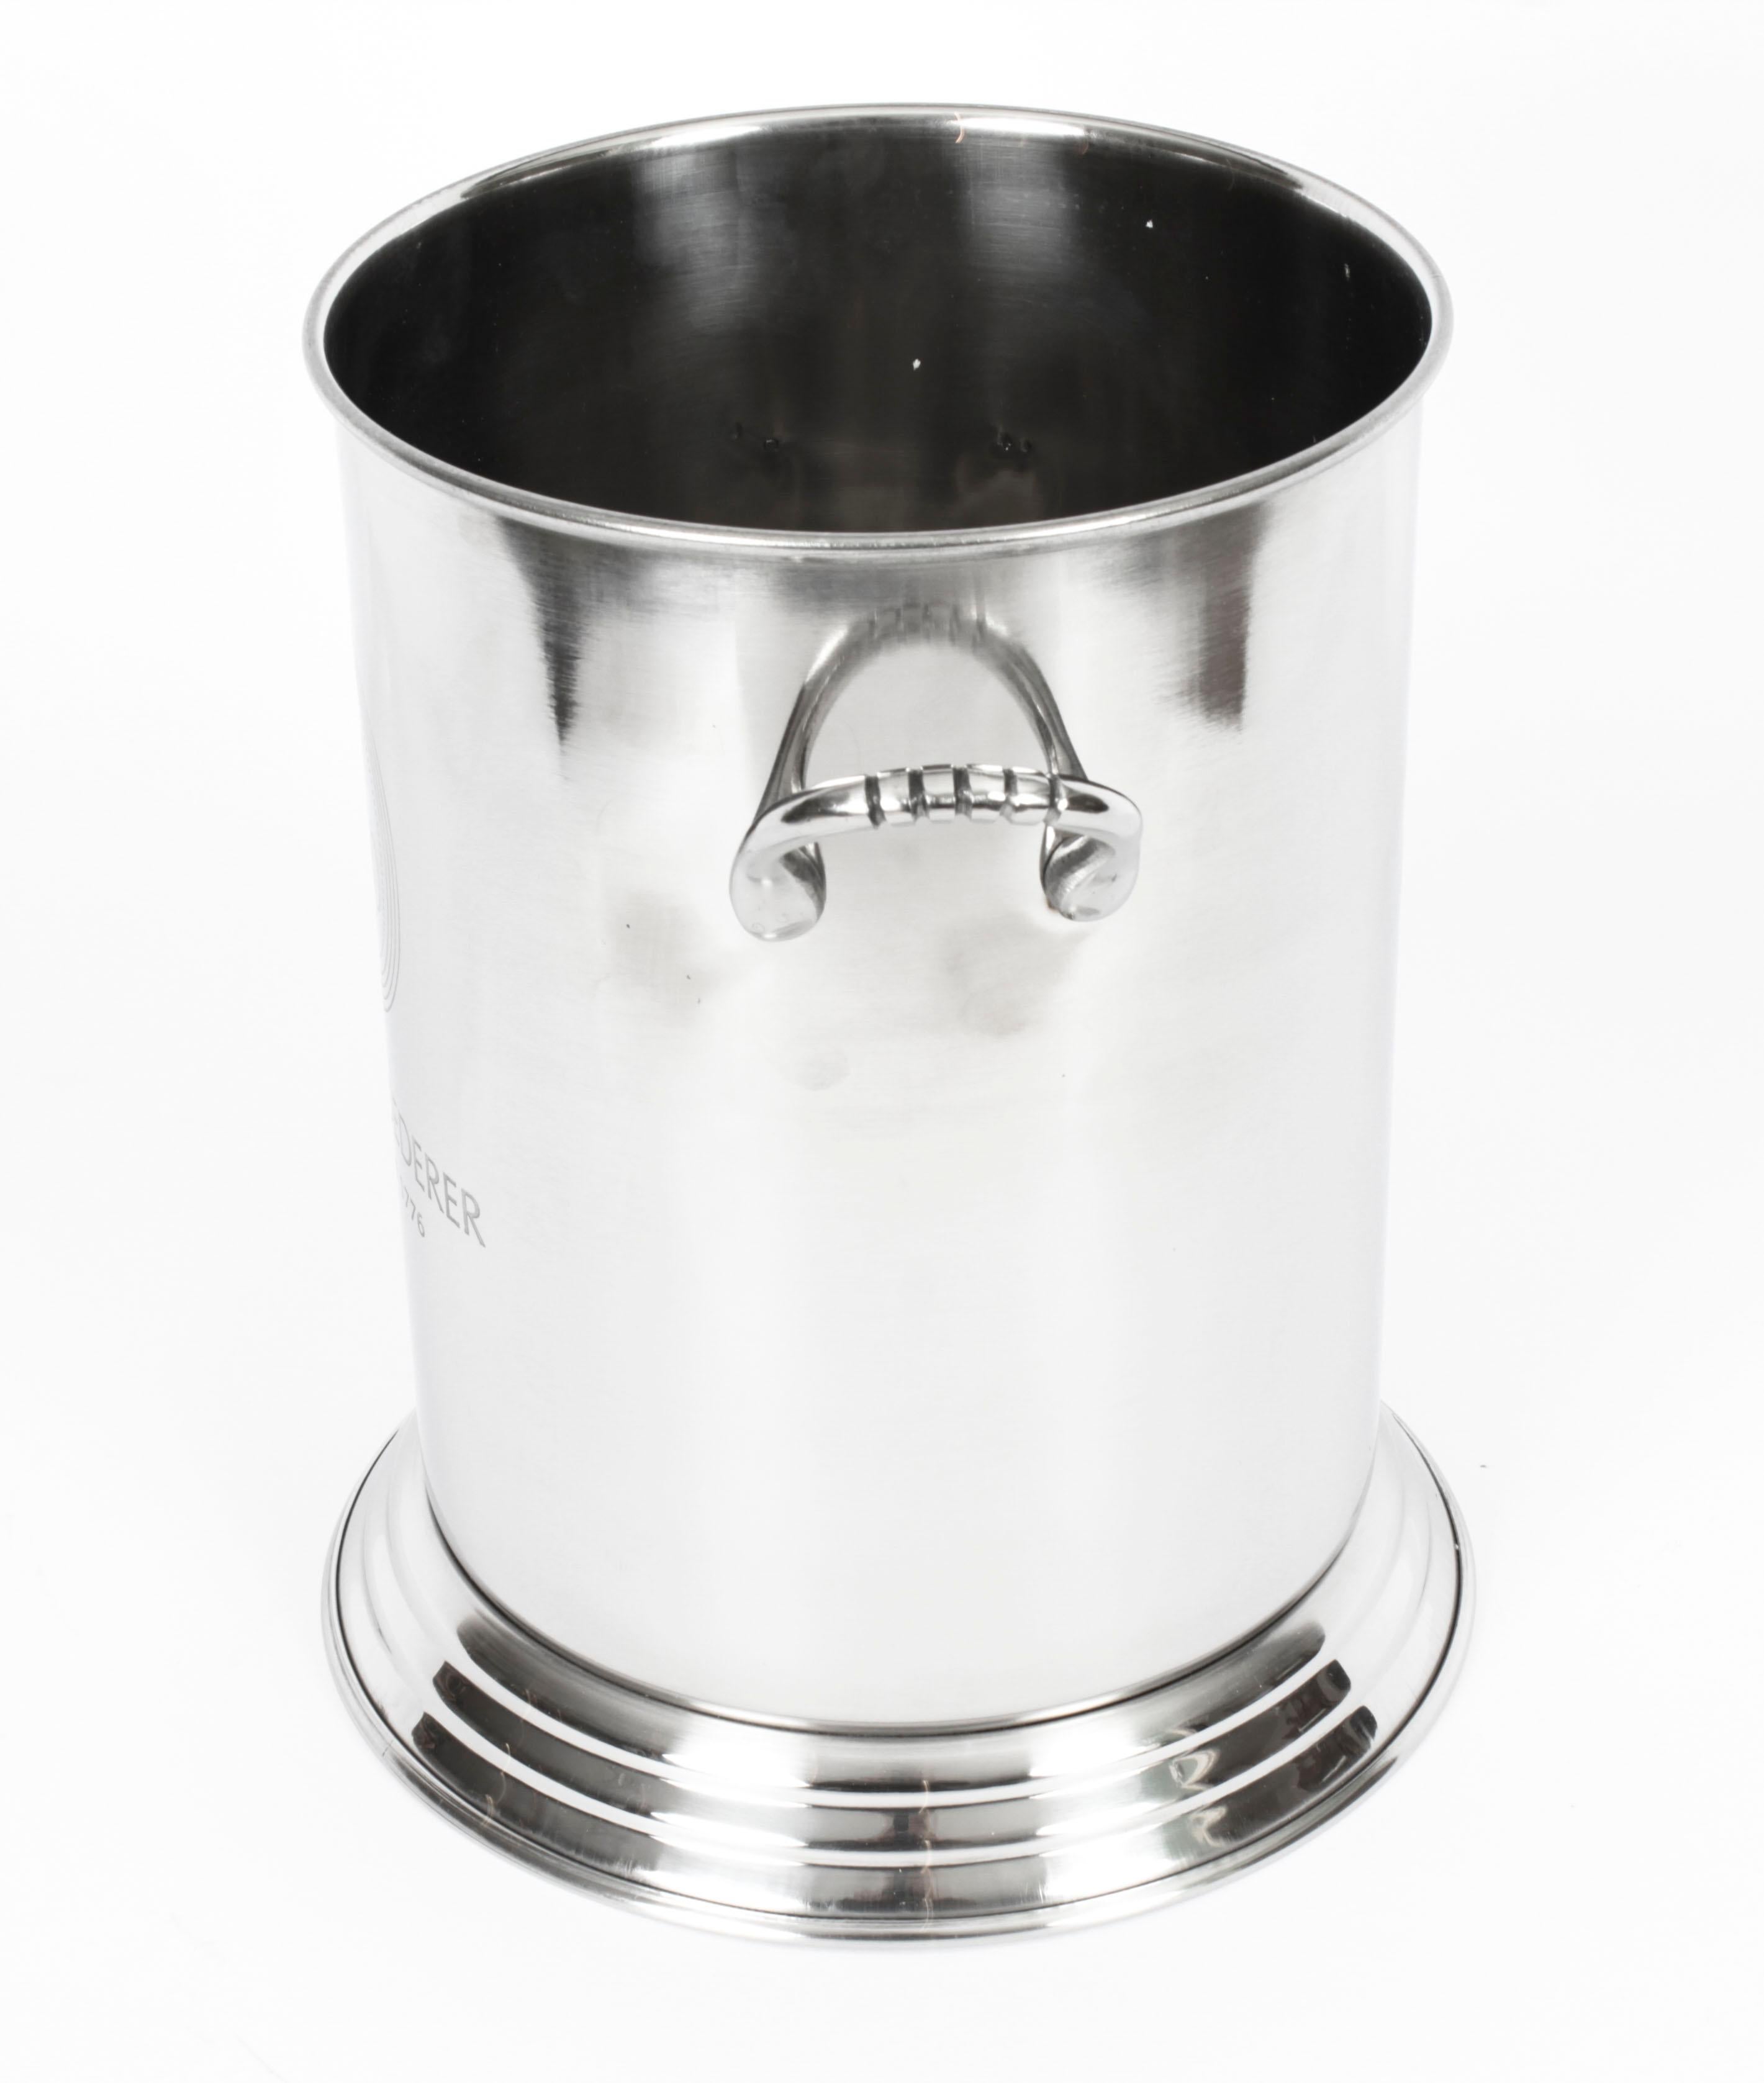 English Vintage Louis Roederer Silver Plated Champagne Cooler 20th Century For Sale